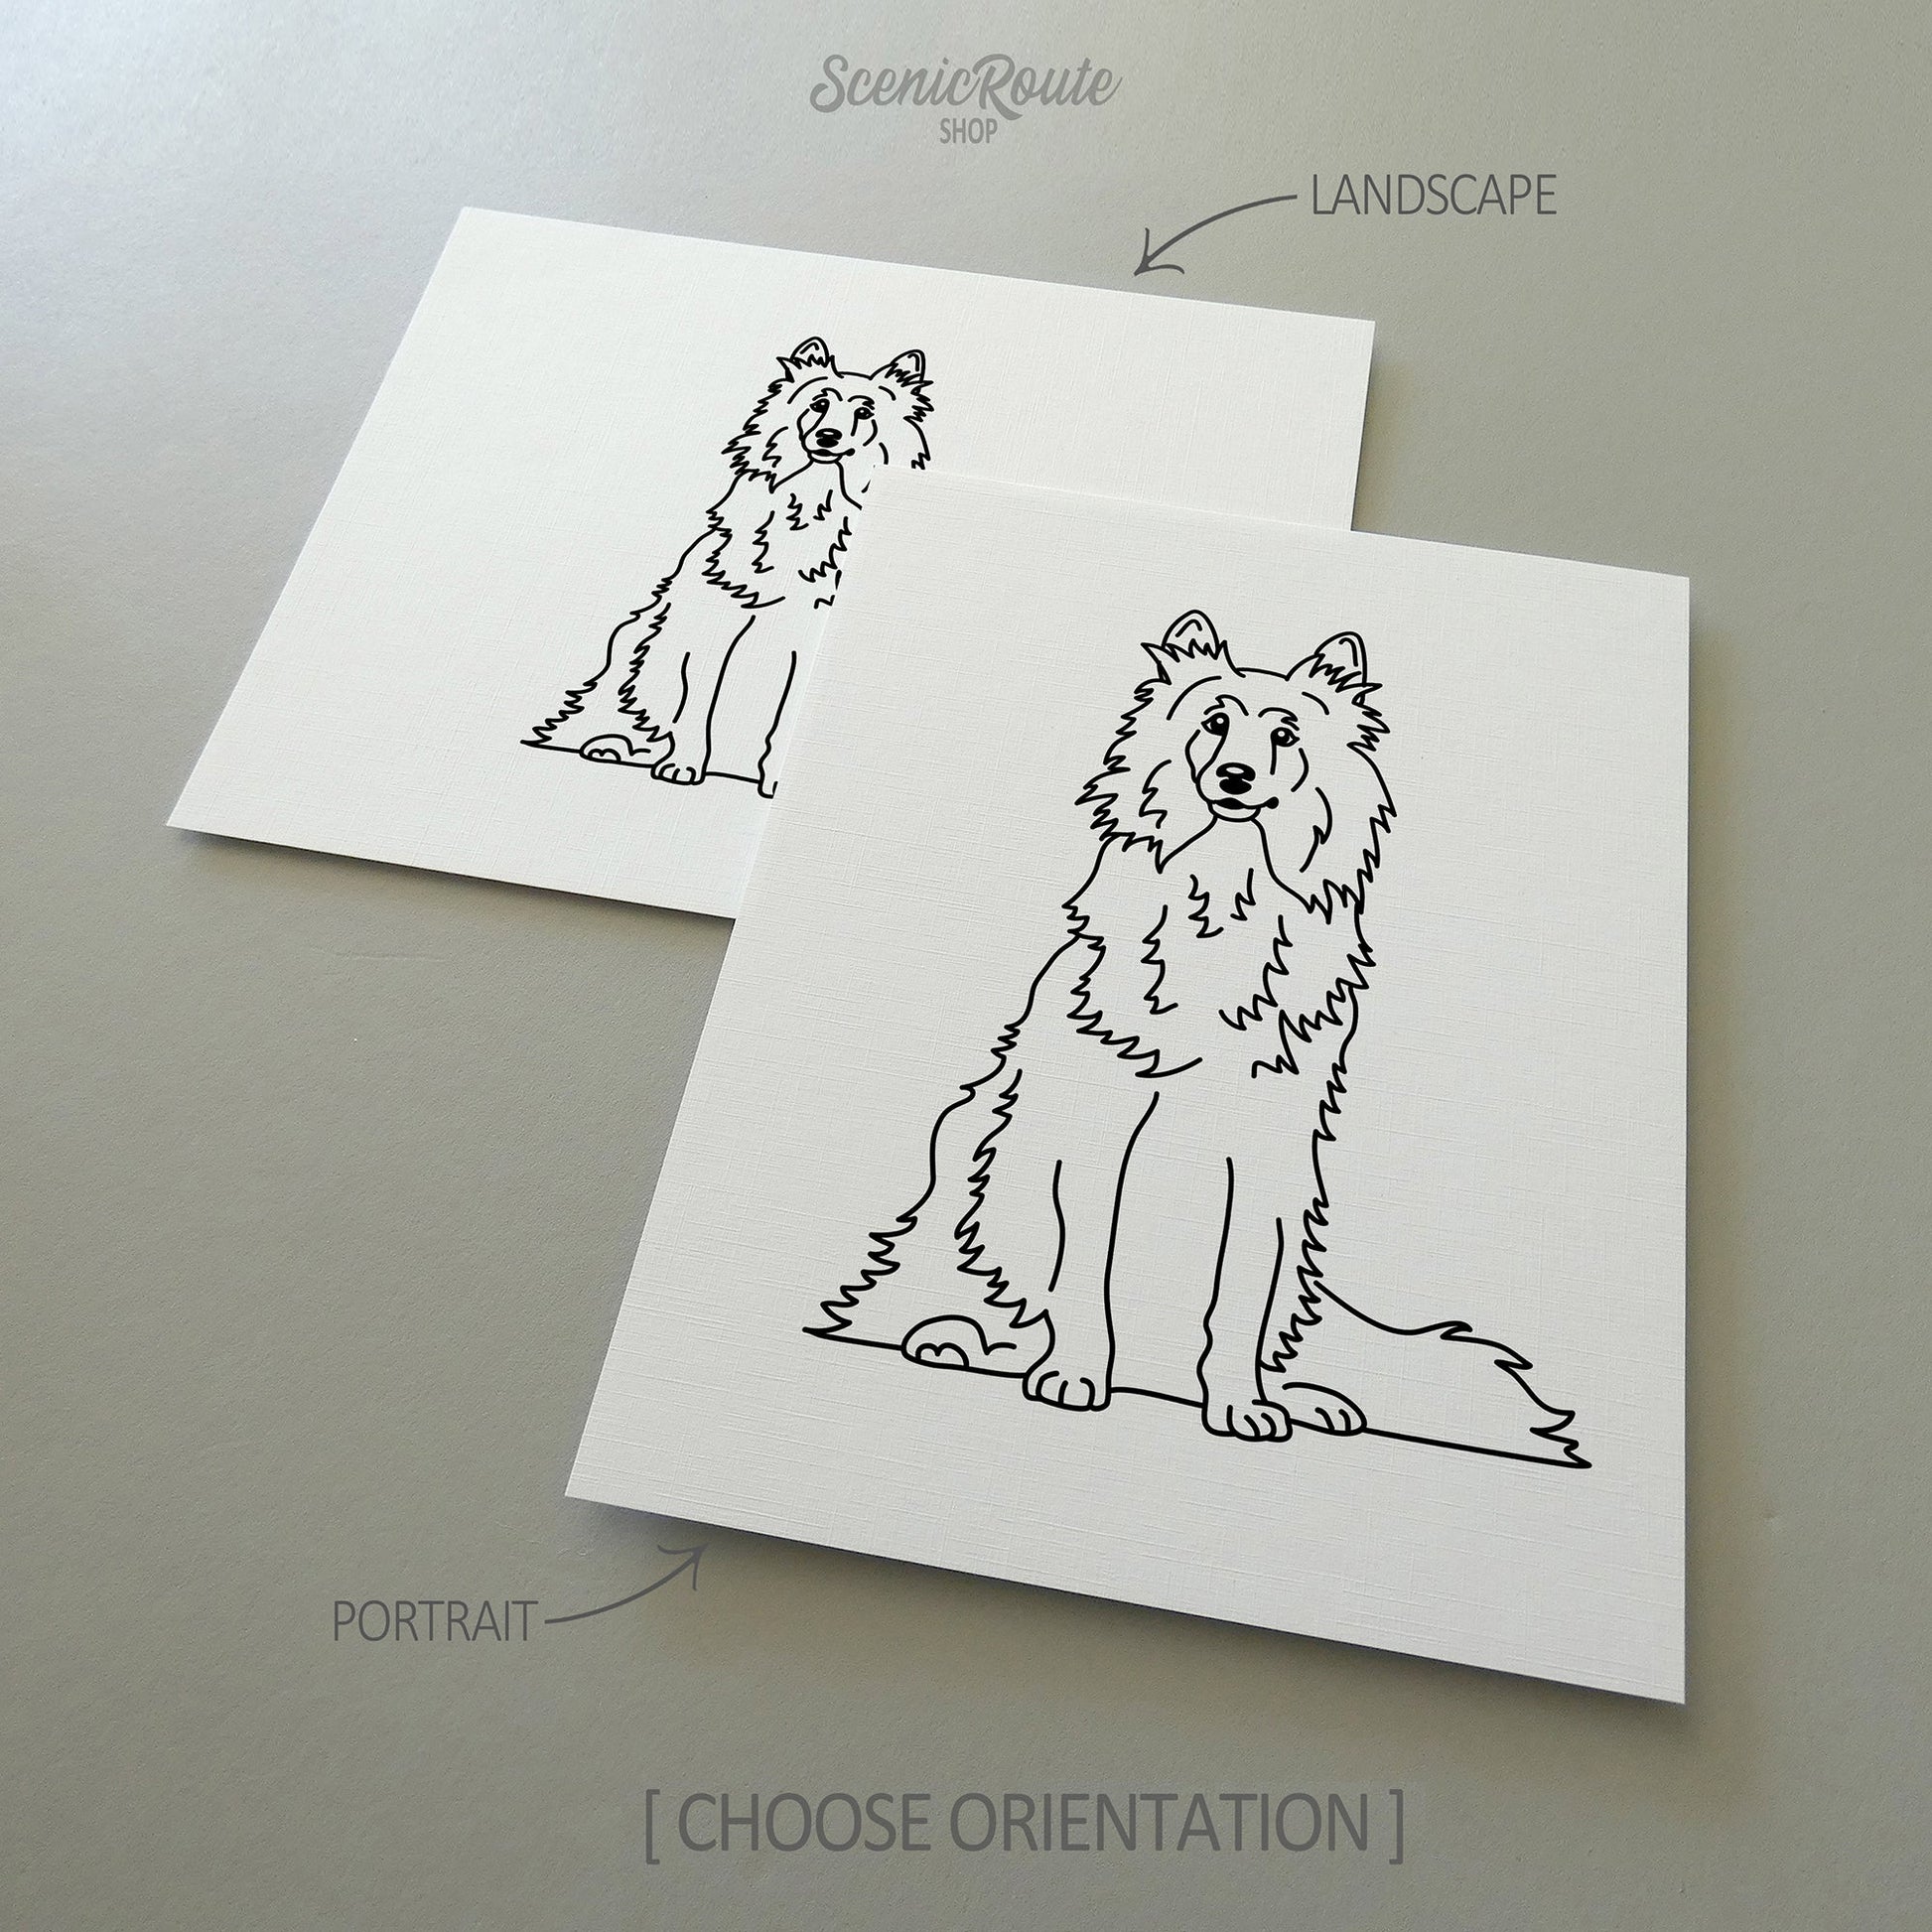 Two line art drawings of a Shetland Sheepdog dog on white linen paper with a gray background.  The pieces are shown in portrait and landscape orientation for the available art print options.